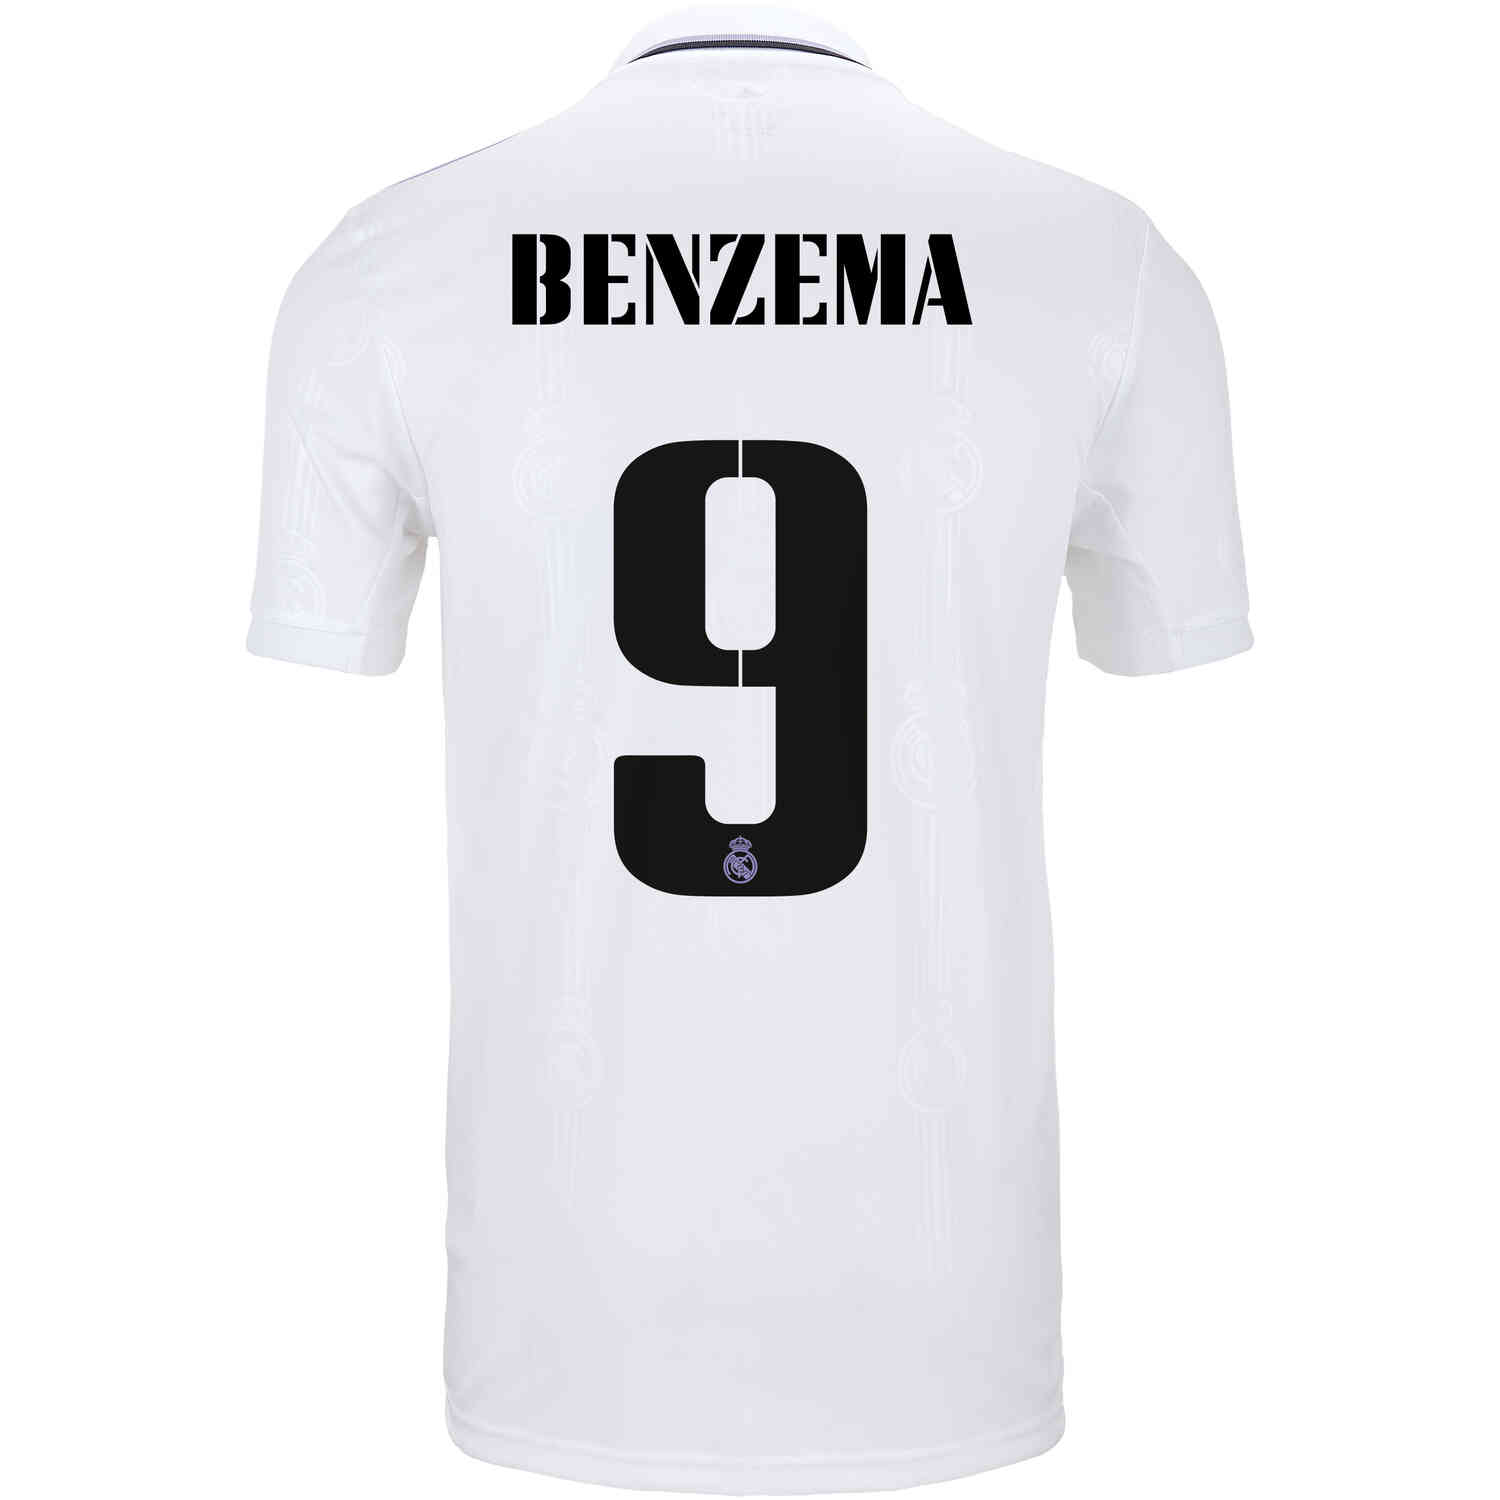 French Club Full Jerseys 2022 Soccer Jersey Sets 2023 BENZEMA